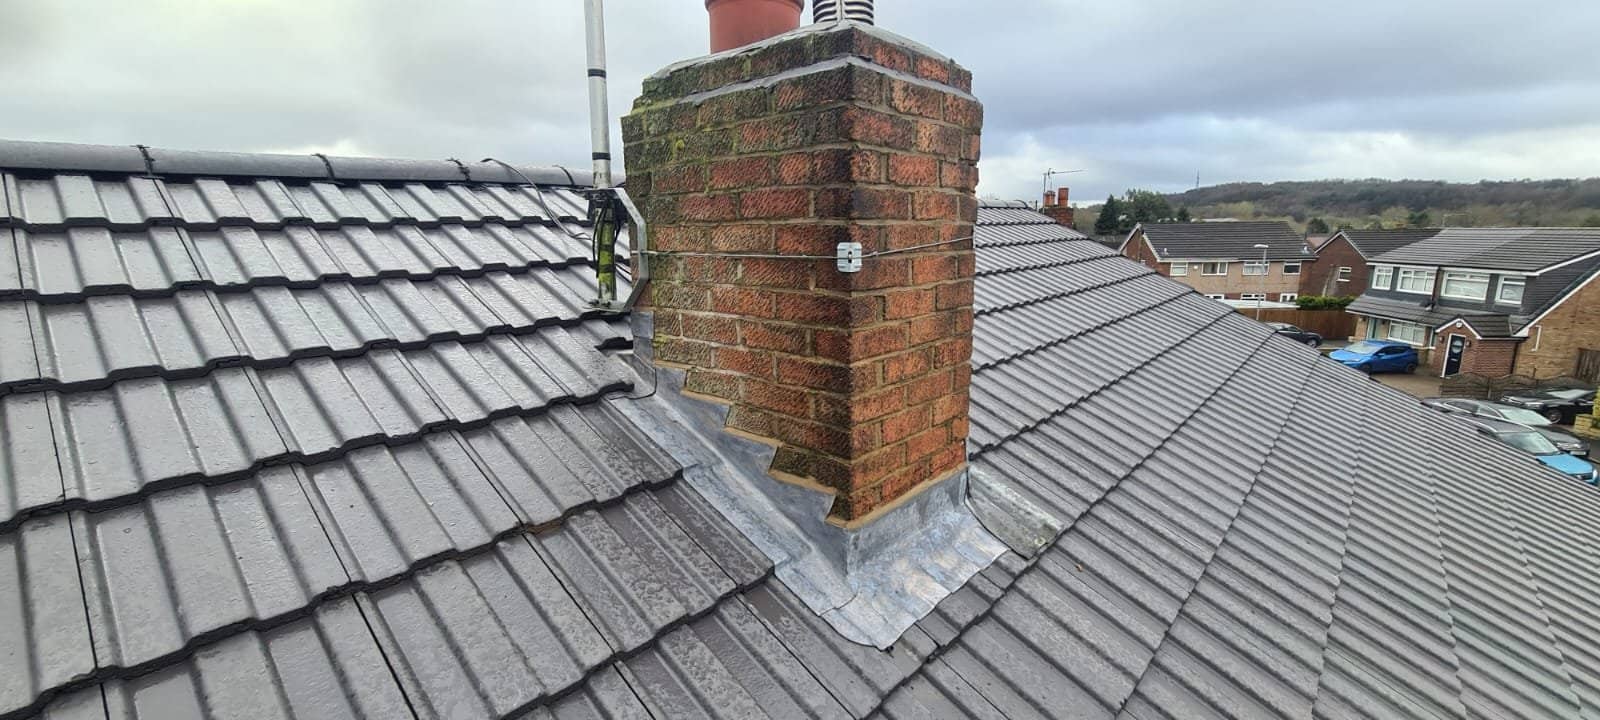 Leadwork on a chimney Manchester